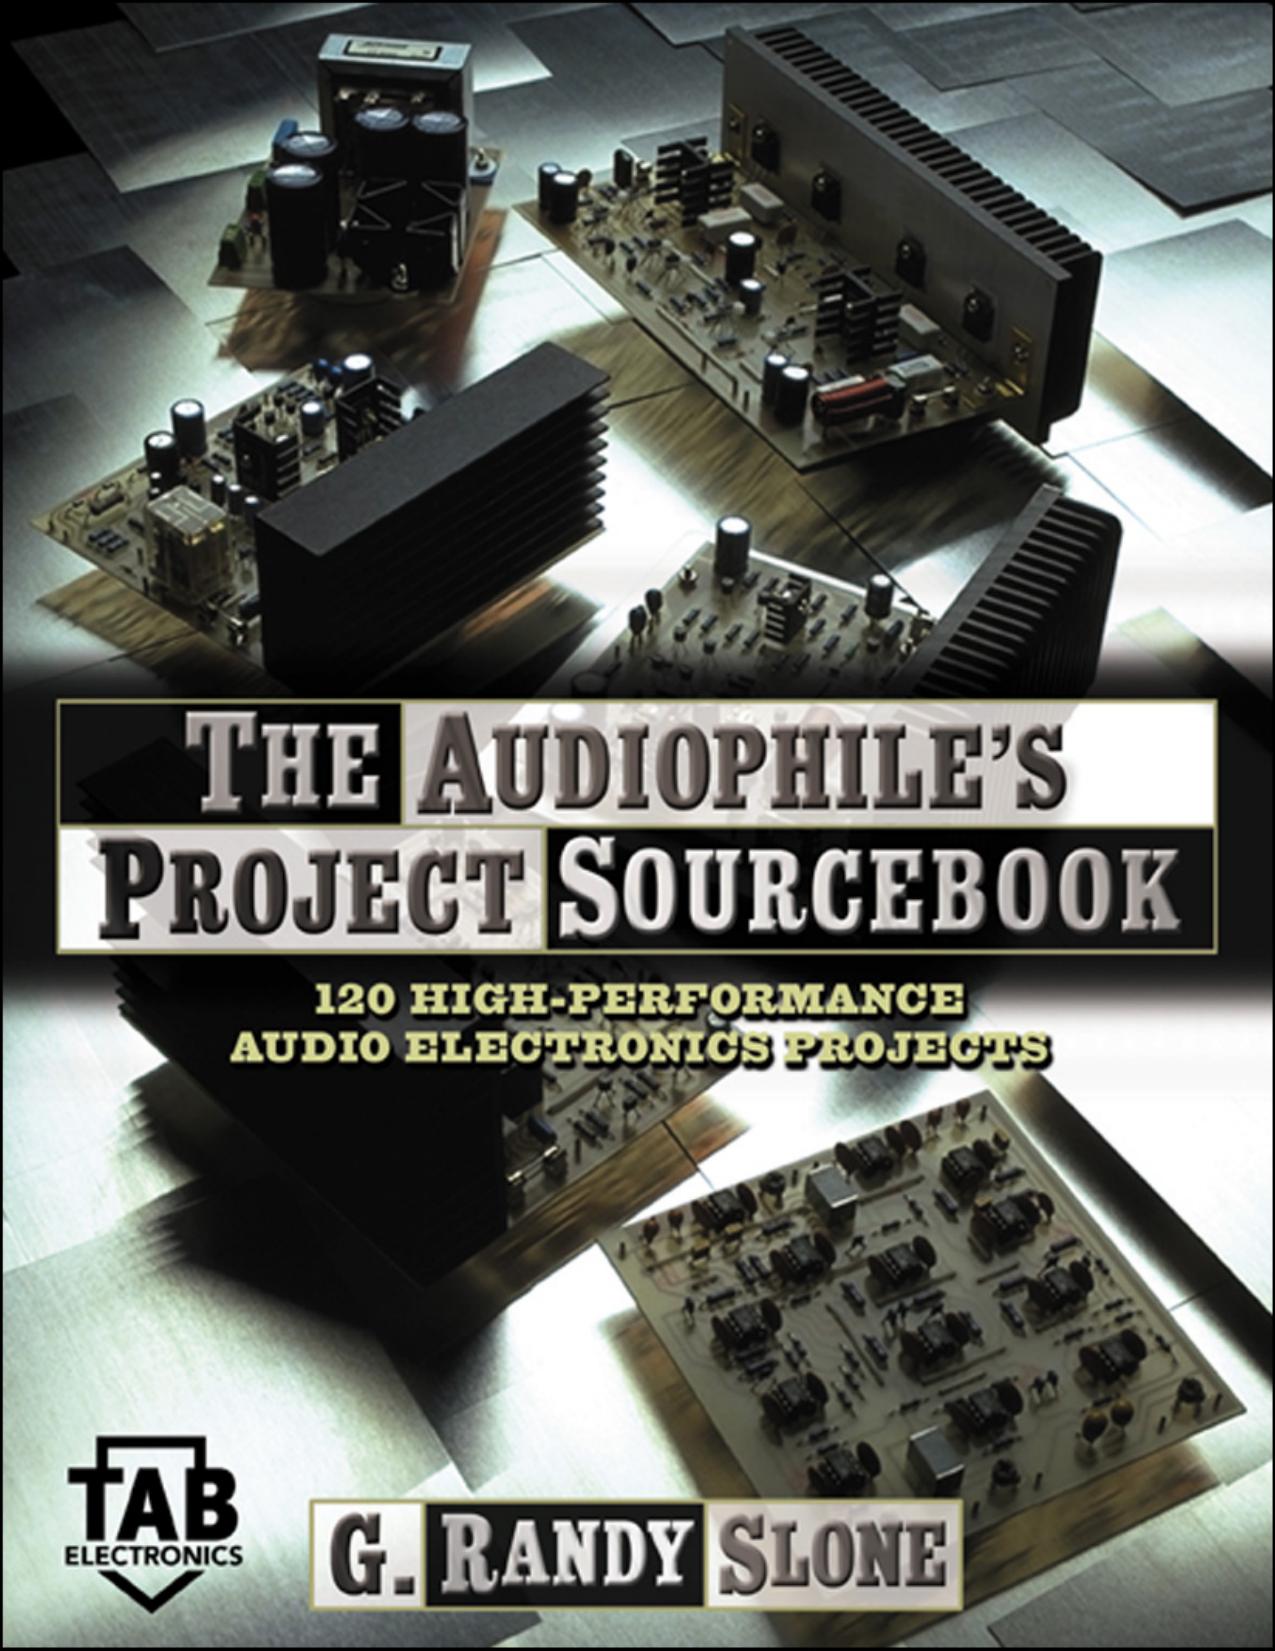 The Audiophile's Project Sourcebook by G. Randy Slone